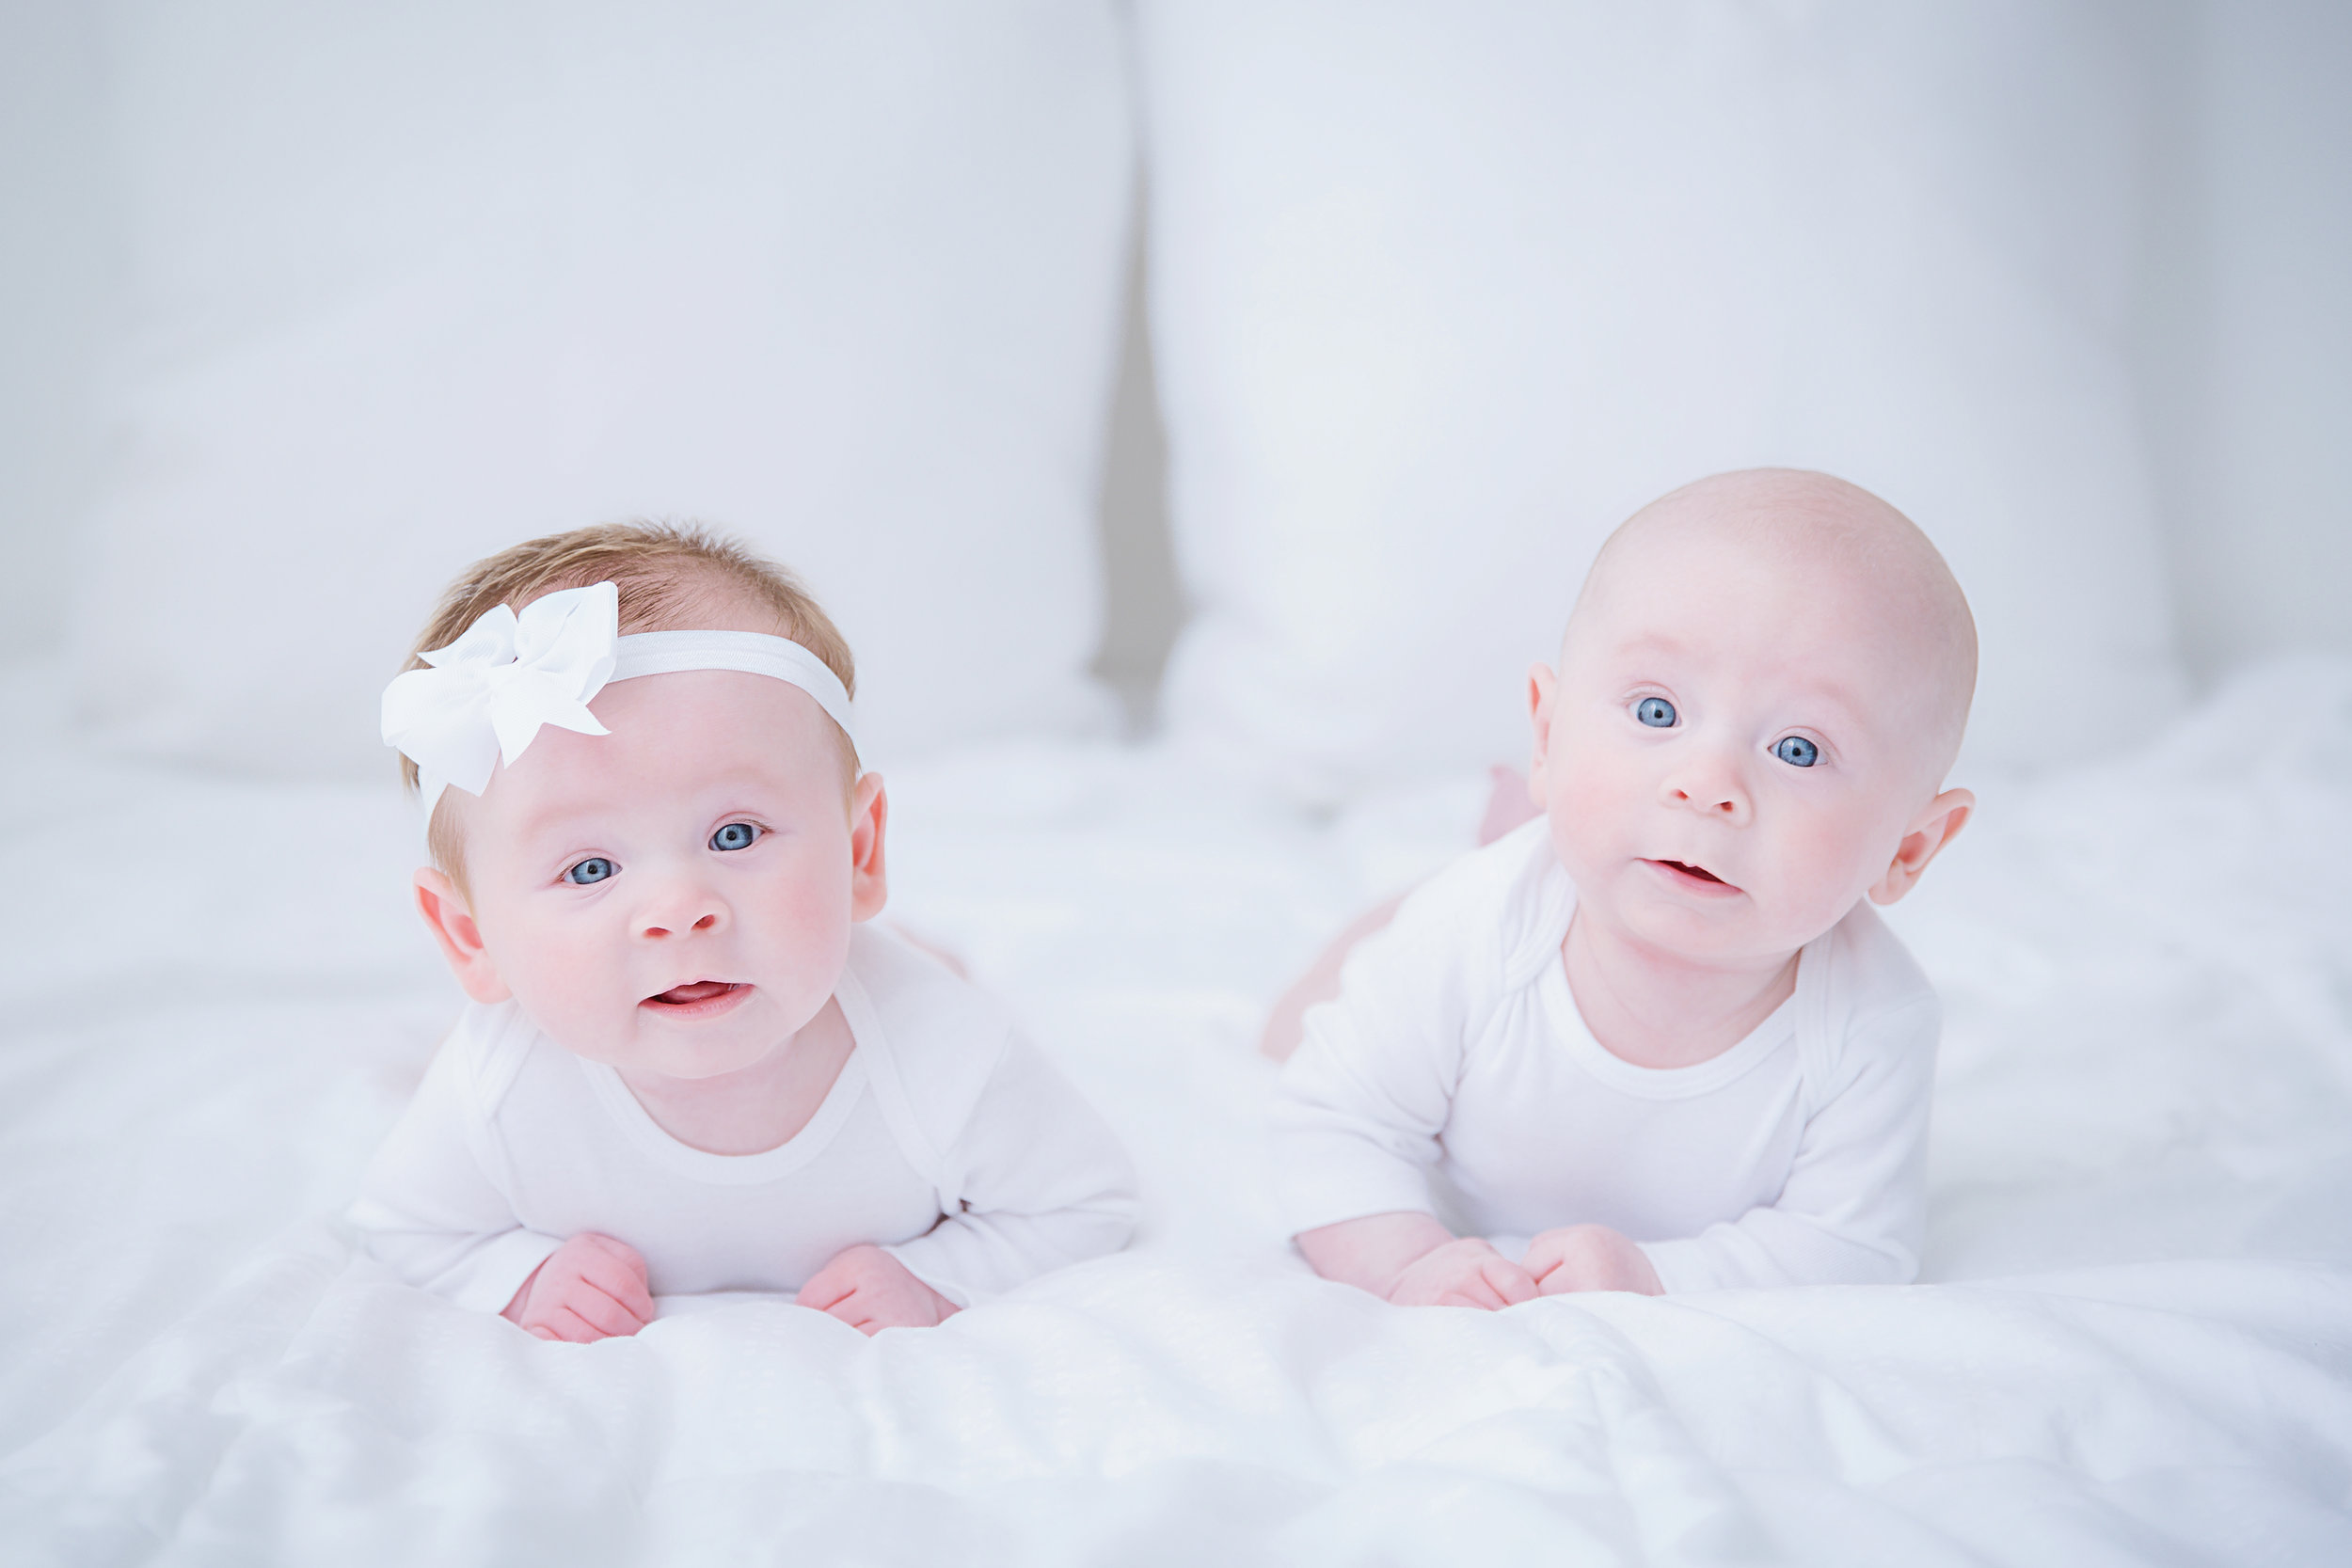 brother-sister-twins-3-months-old-baby-siblings-lying-on-tummy-looking-towards-camera-photography-shoot-new-jersey-white-bed-white-clothes